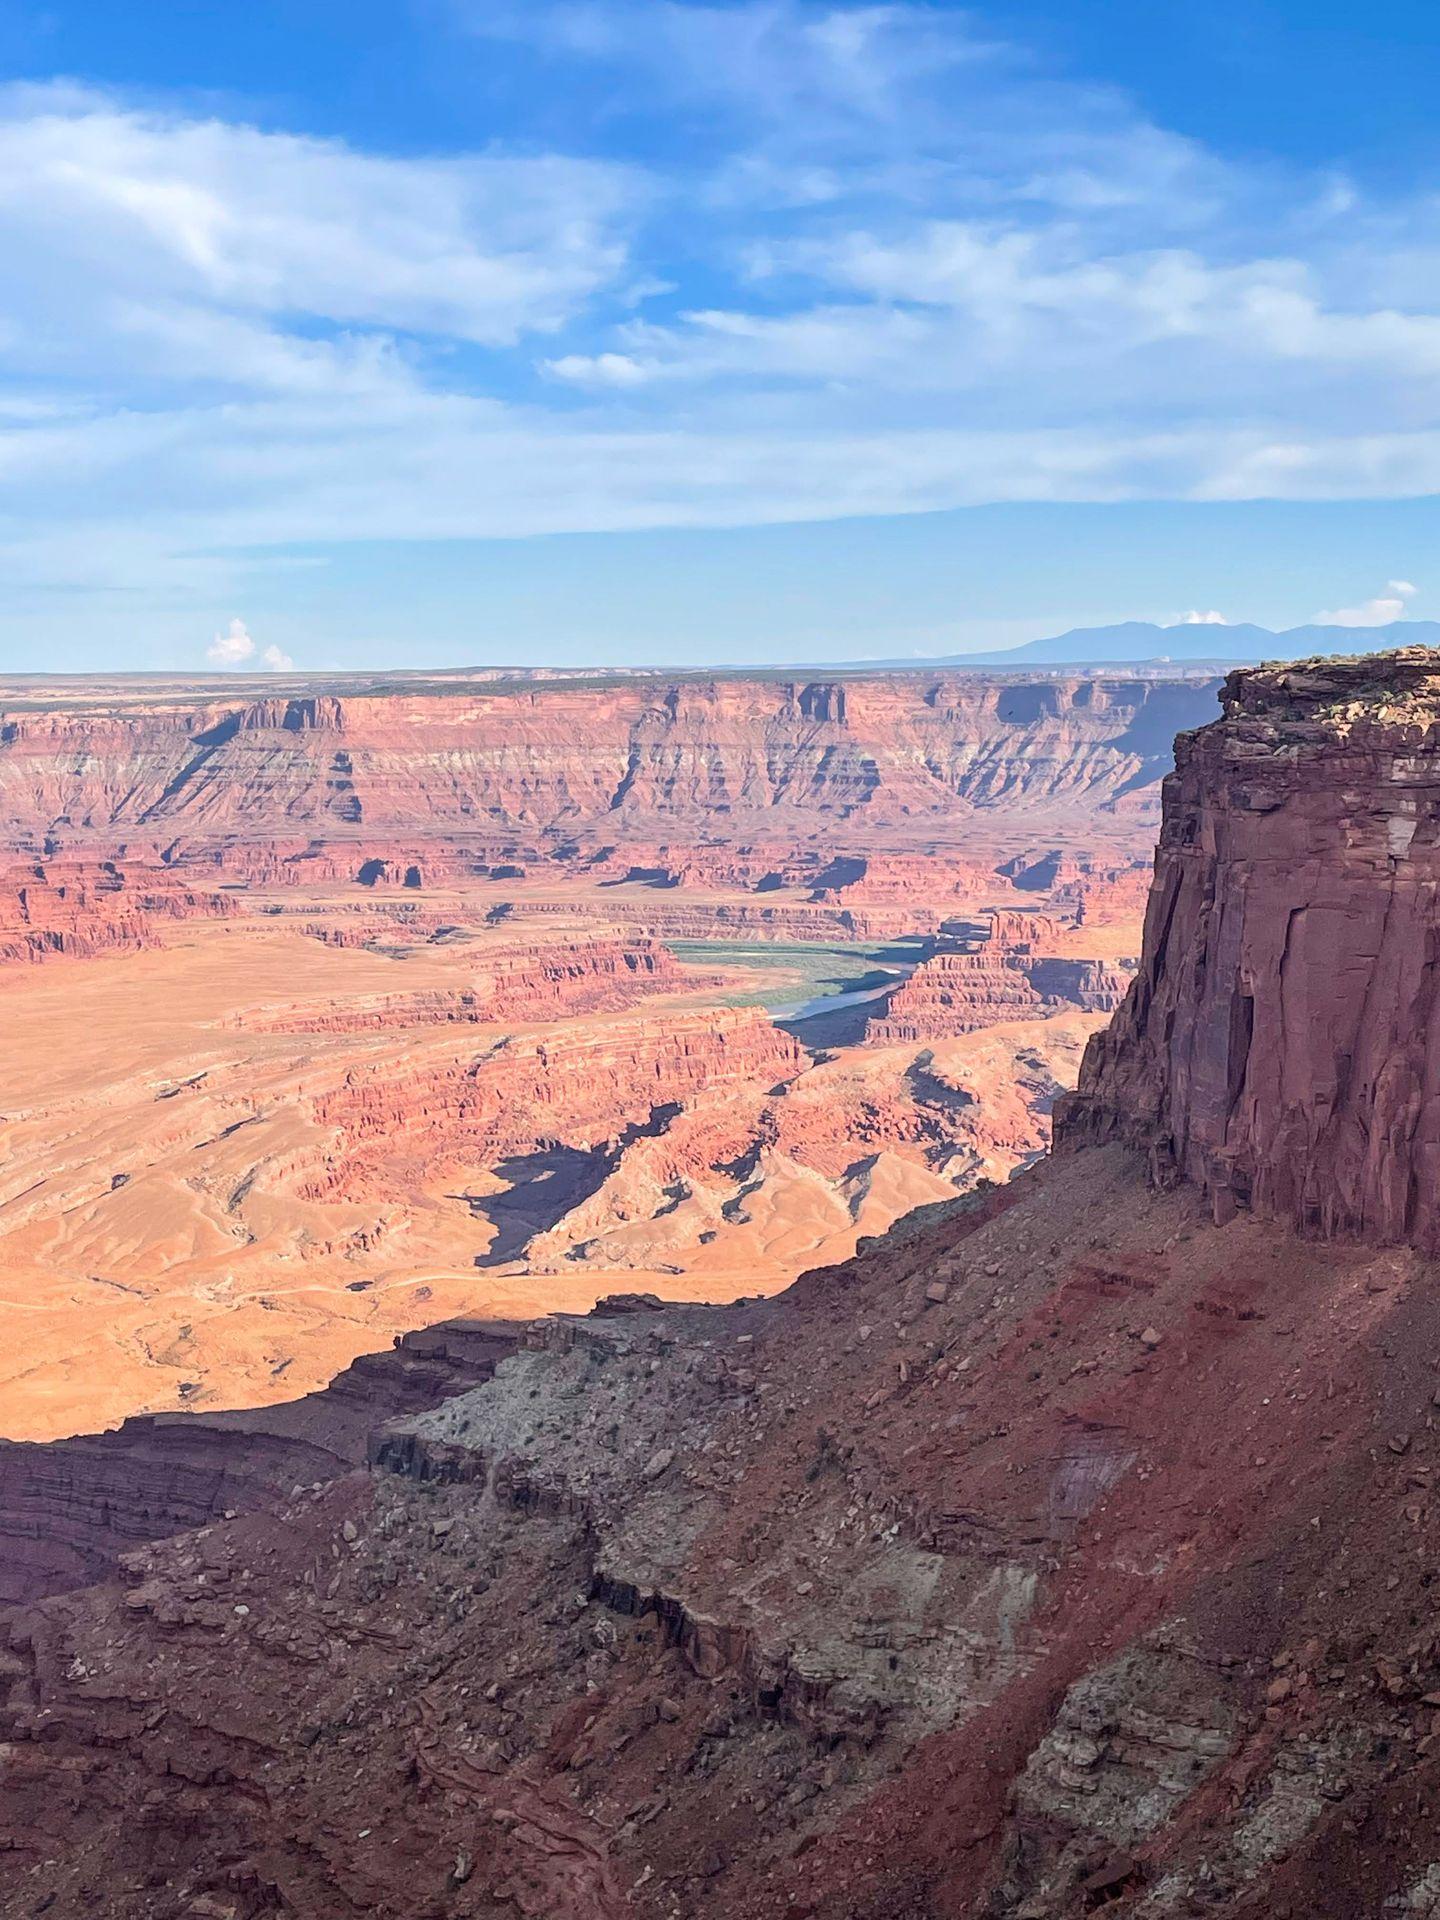 Looking out at a canyon from Dead Horse Point State Park. There is a bit of river in the view